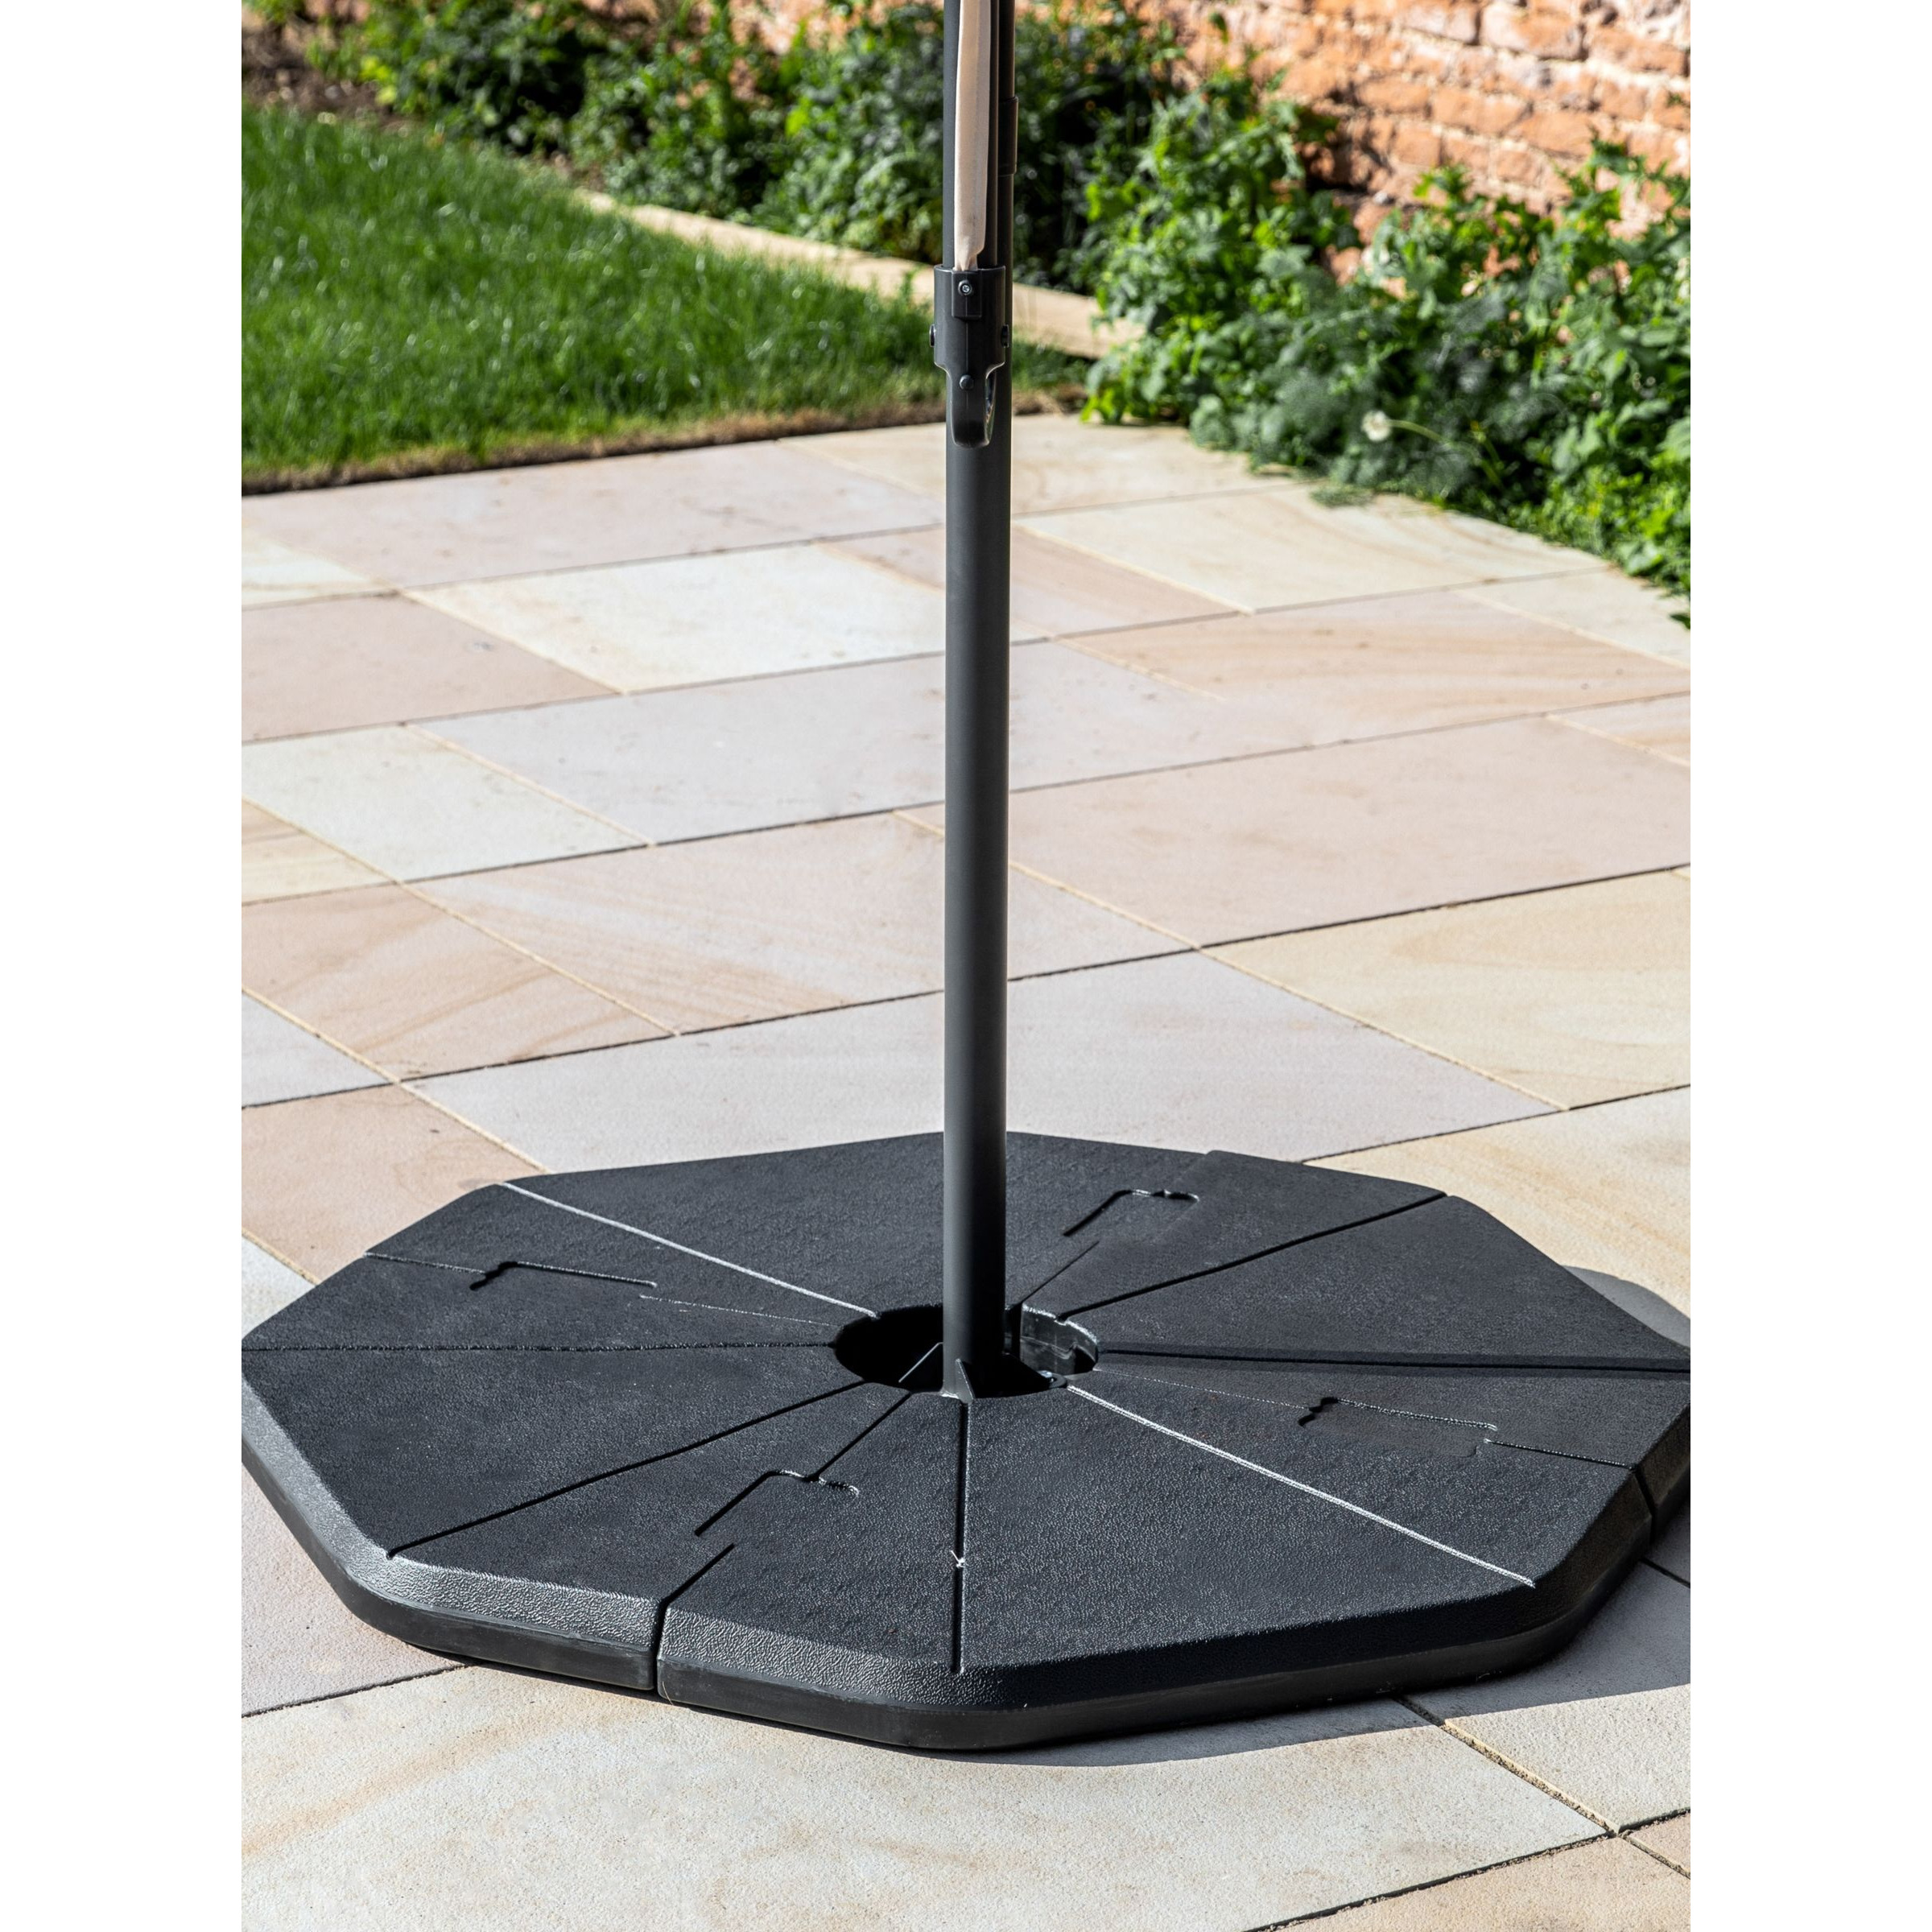 Gallery Direct Brockton Cantilevered Parasol Base Weight, 60kg - image 1